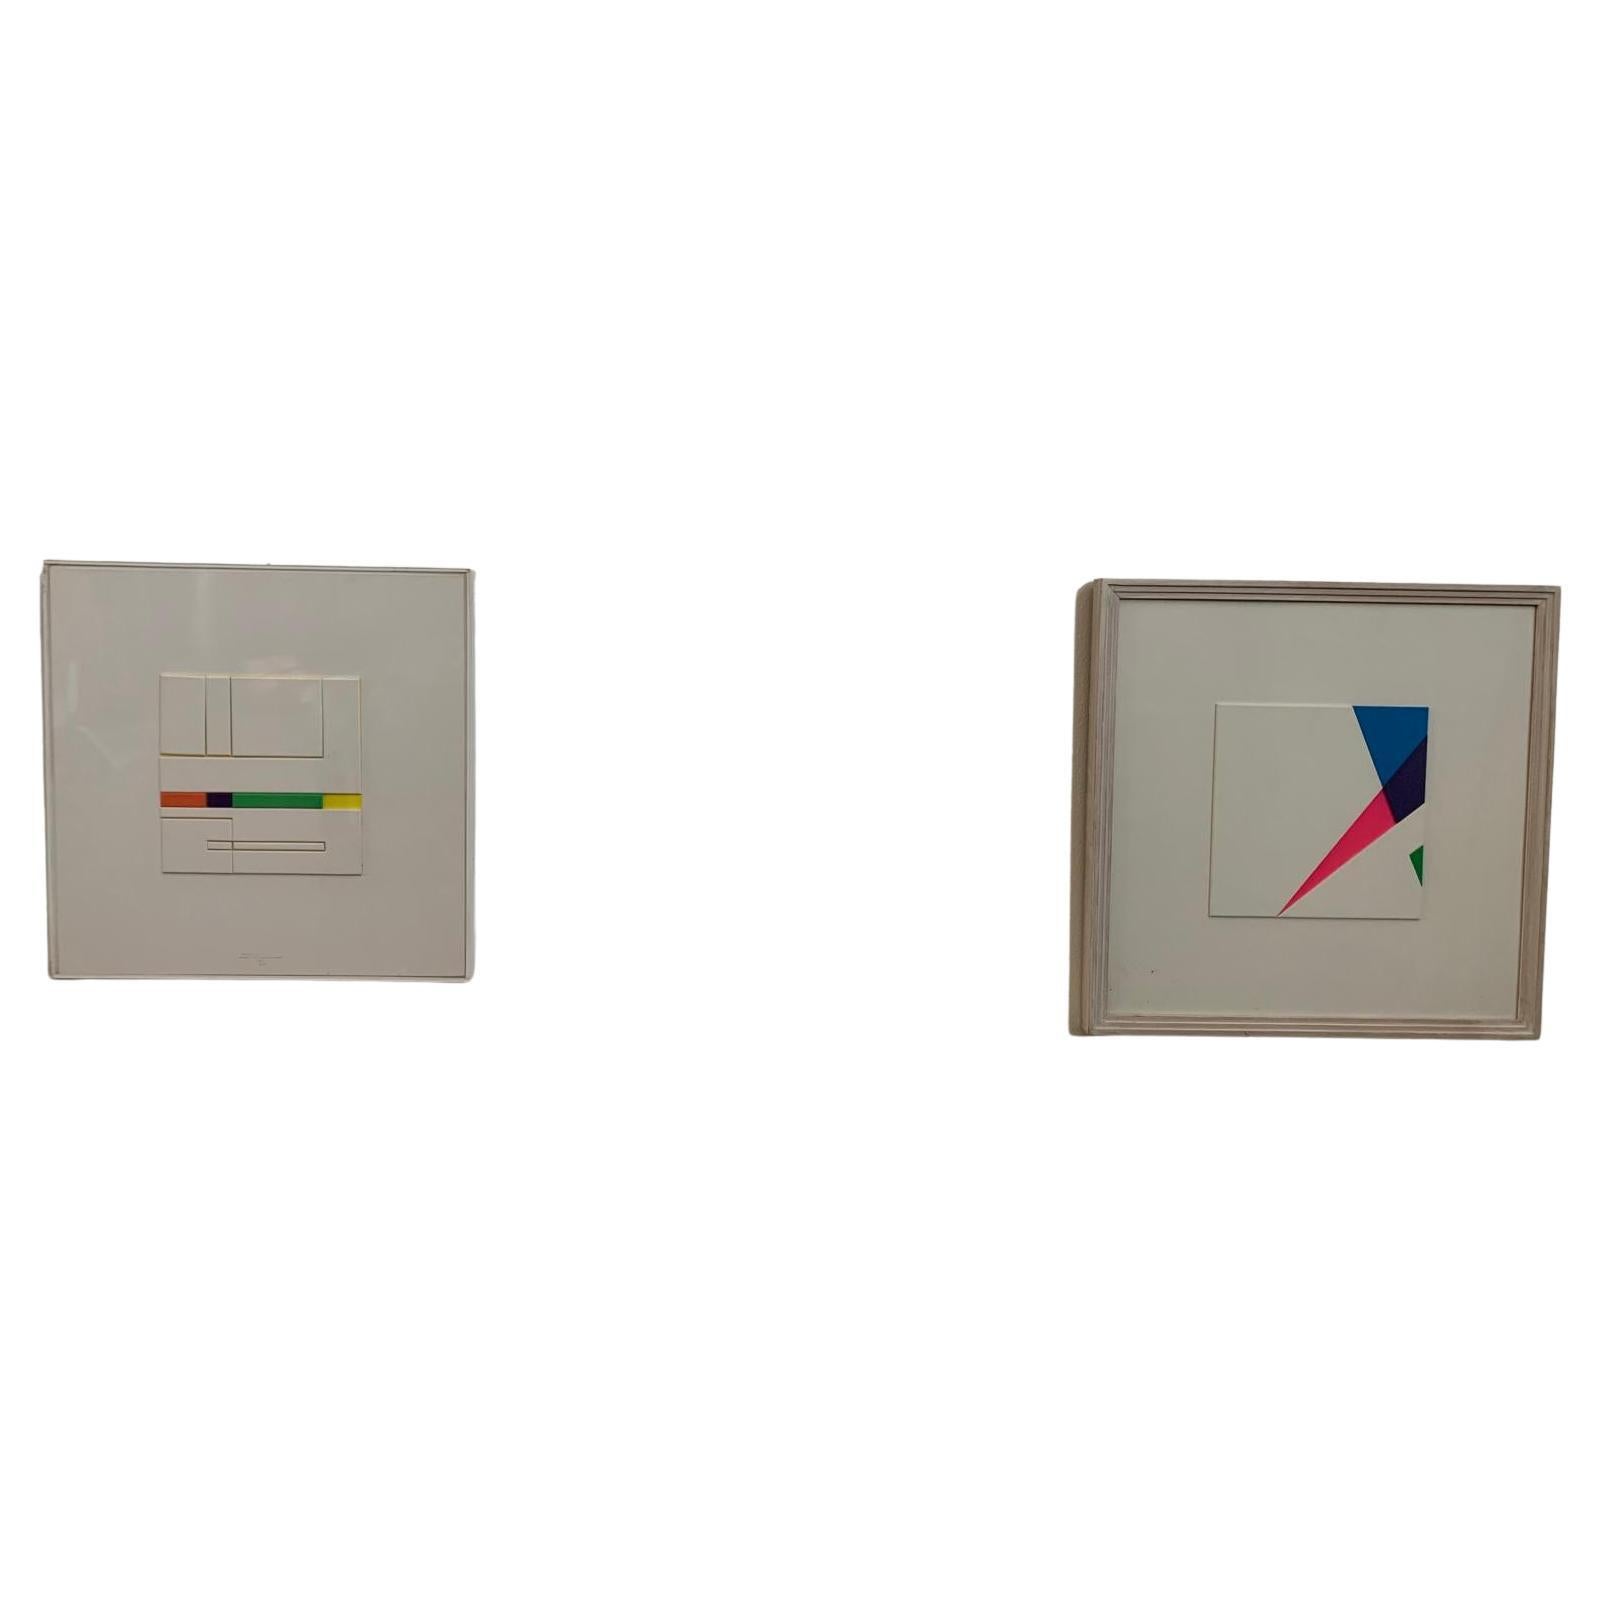 Alfredo Troisi, Evolution of the Square, 1975, Mixed Media on Cardboard For Sale